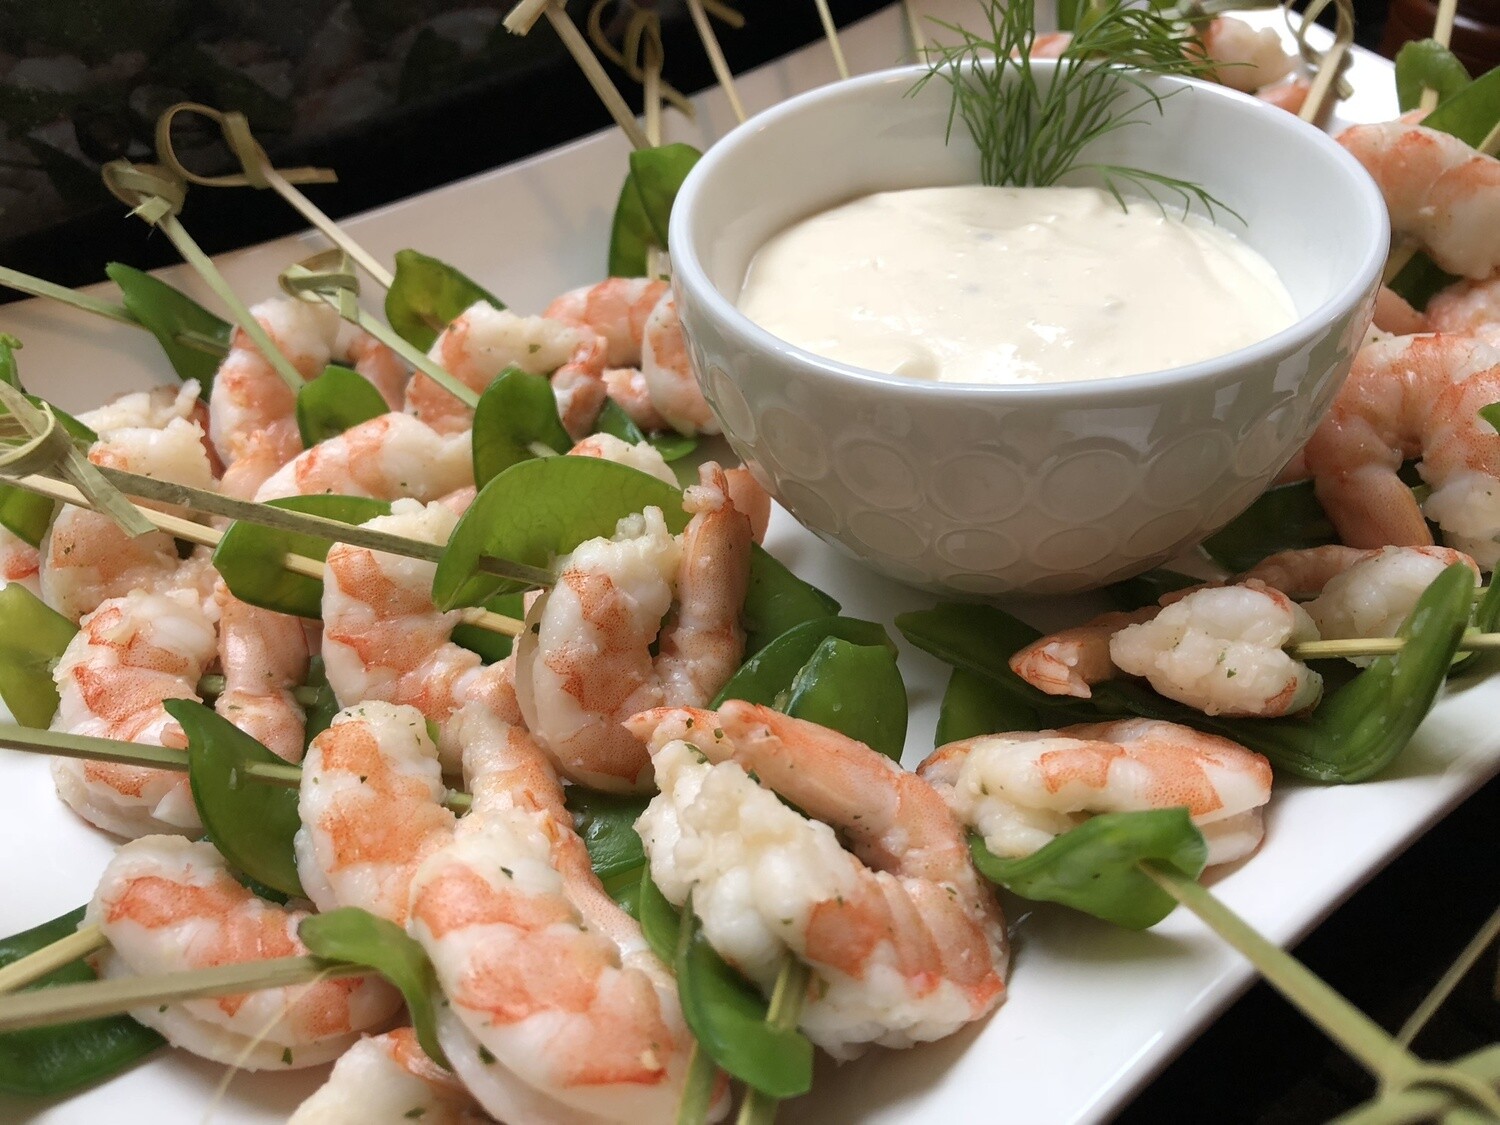 Shrimp Platter with Cocktail Sauce and Citrus Mayo (serves 10 approx.)